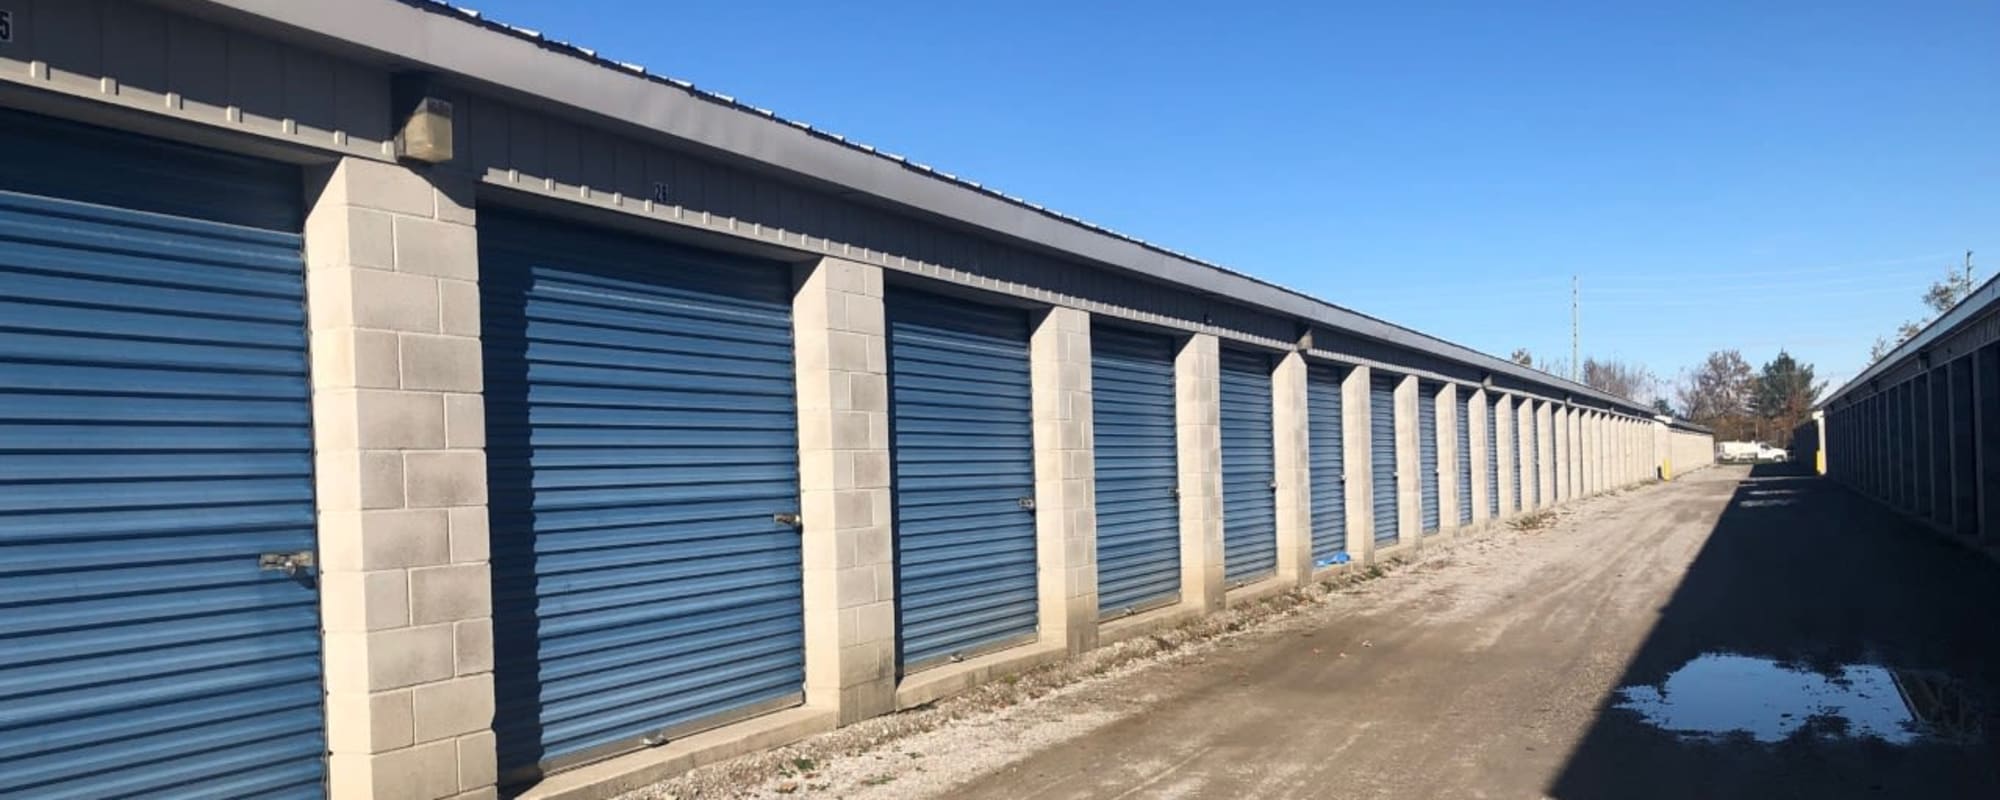 Blog page for Apple Self Storage - Fonthill in Welland, Ontario